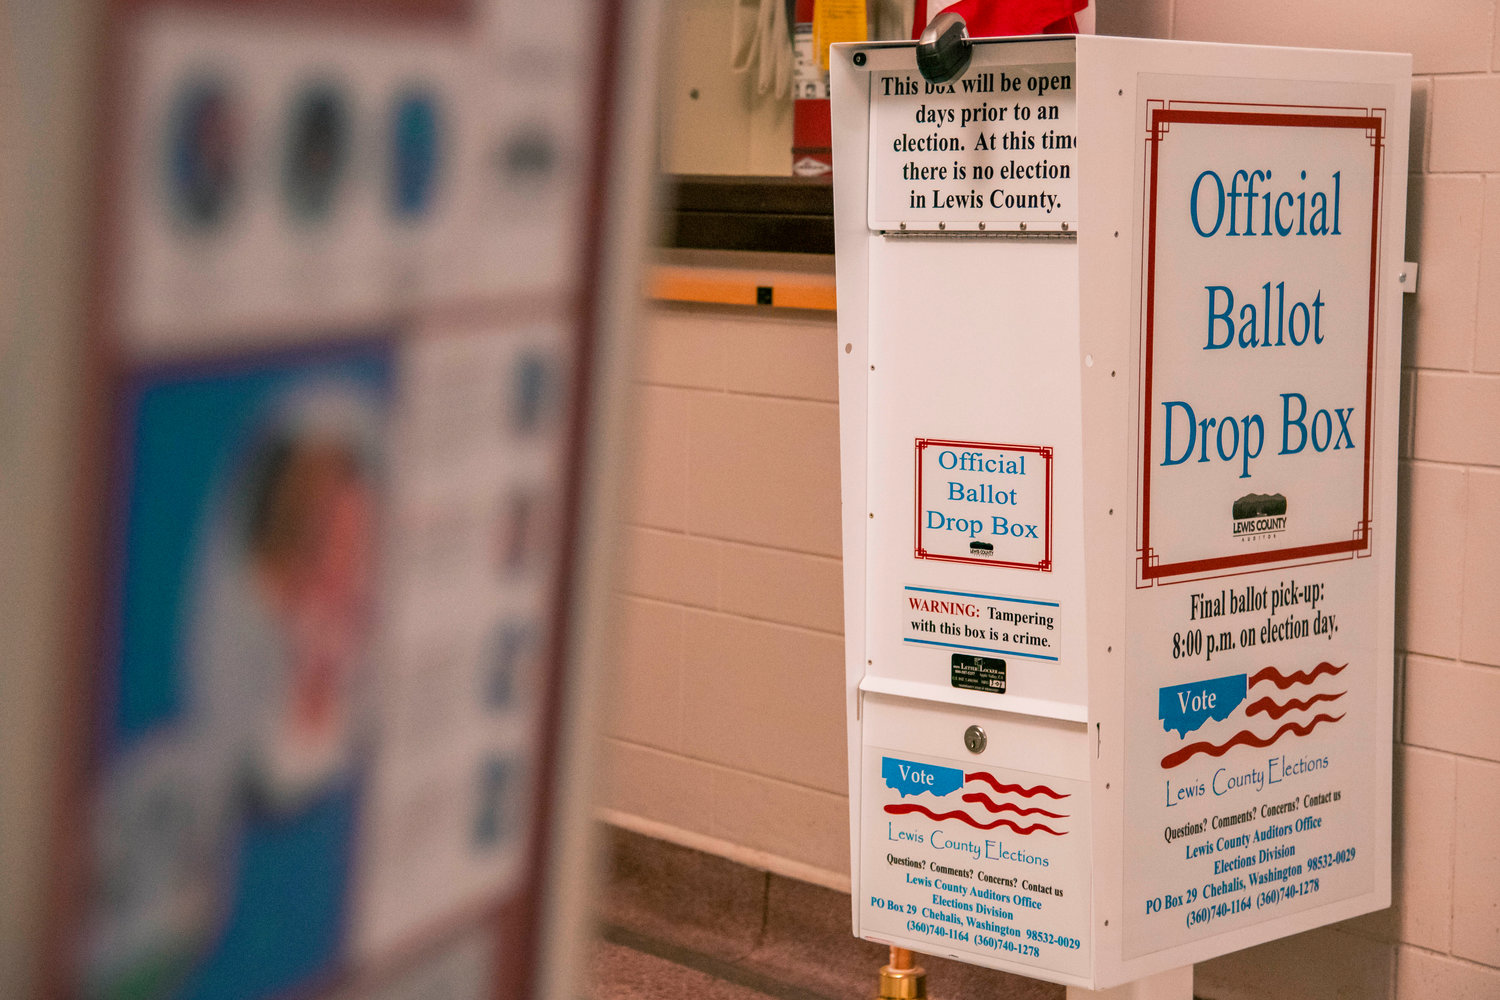 FILE PHOTO — An official ballot drop box sits locked outside the Lewis County Auditor’s Office in Chehalis.